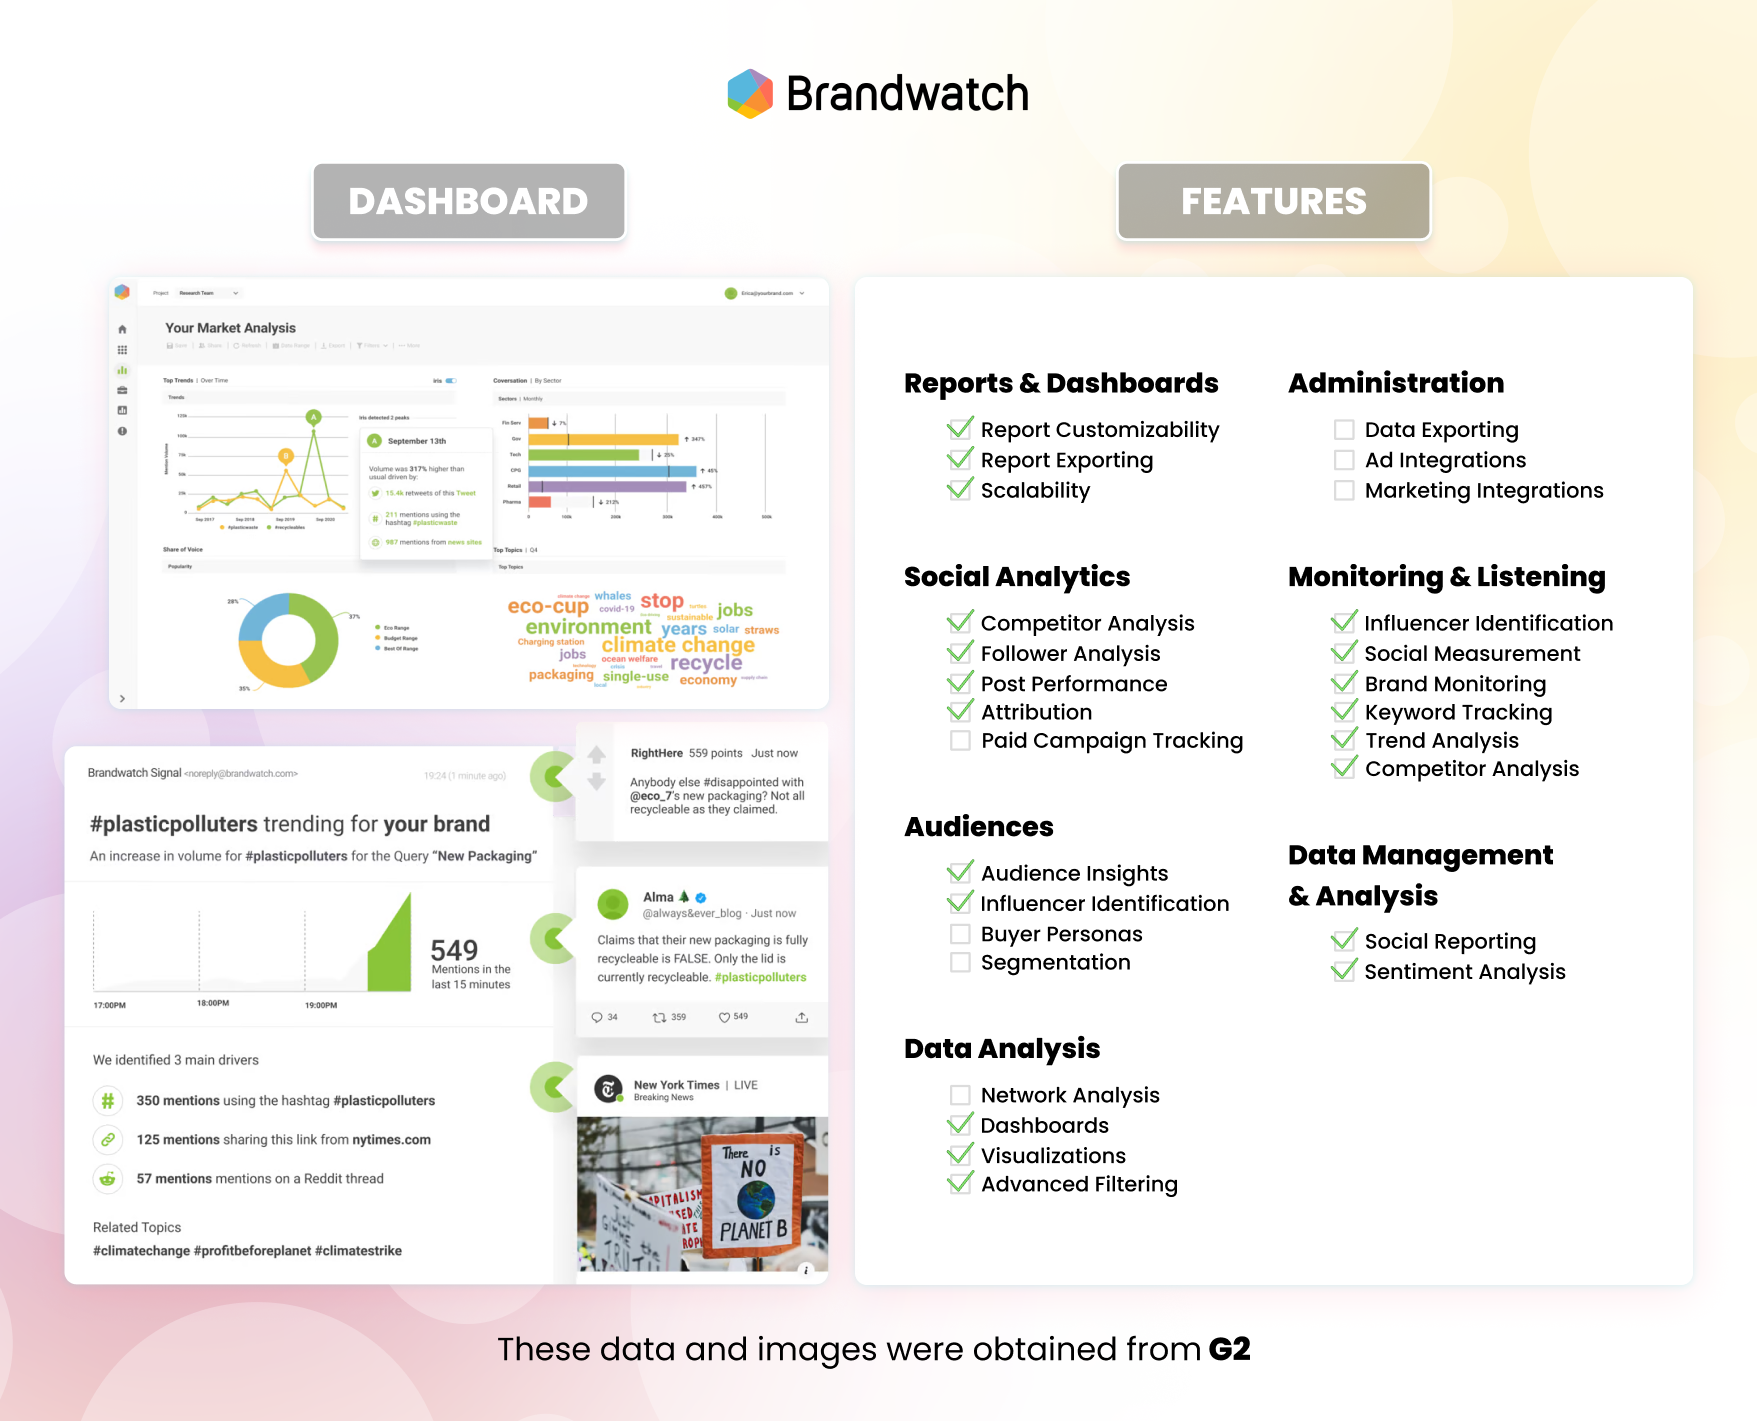 Brandwatch dashboard and the features this platform includes